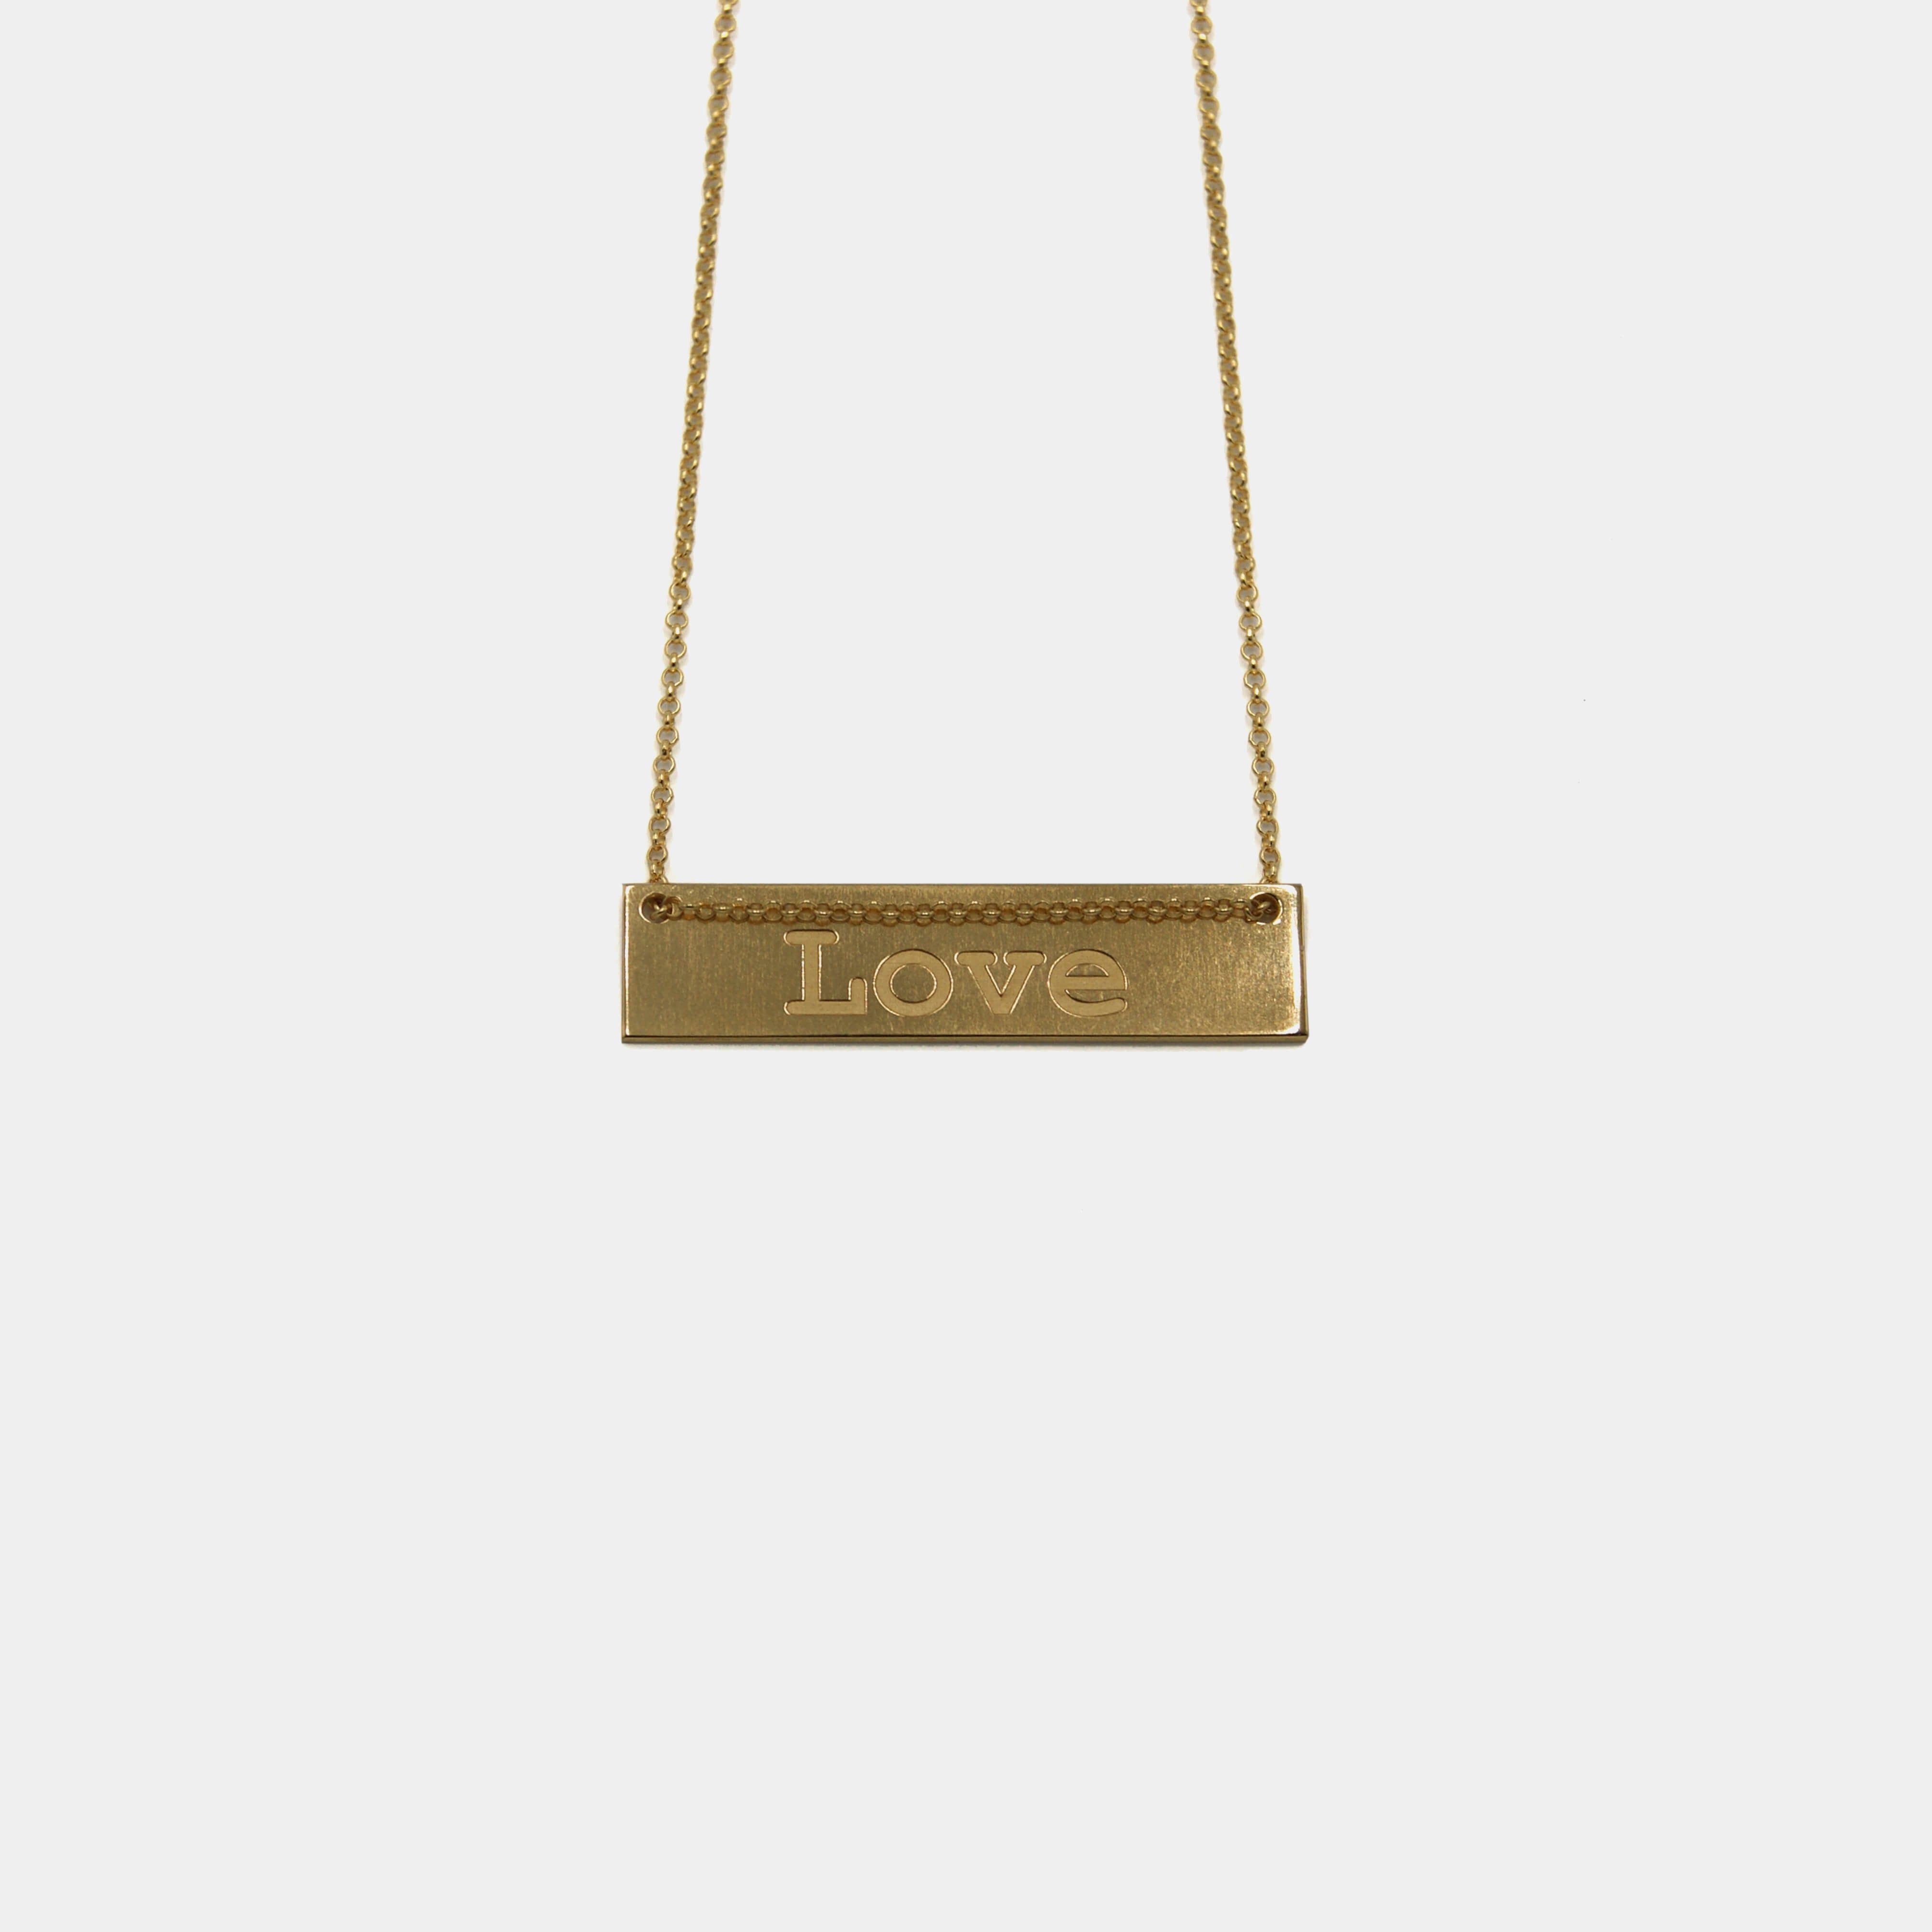 Love - necklace - silver 925 - gold plated